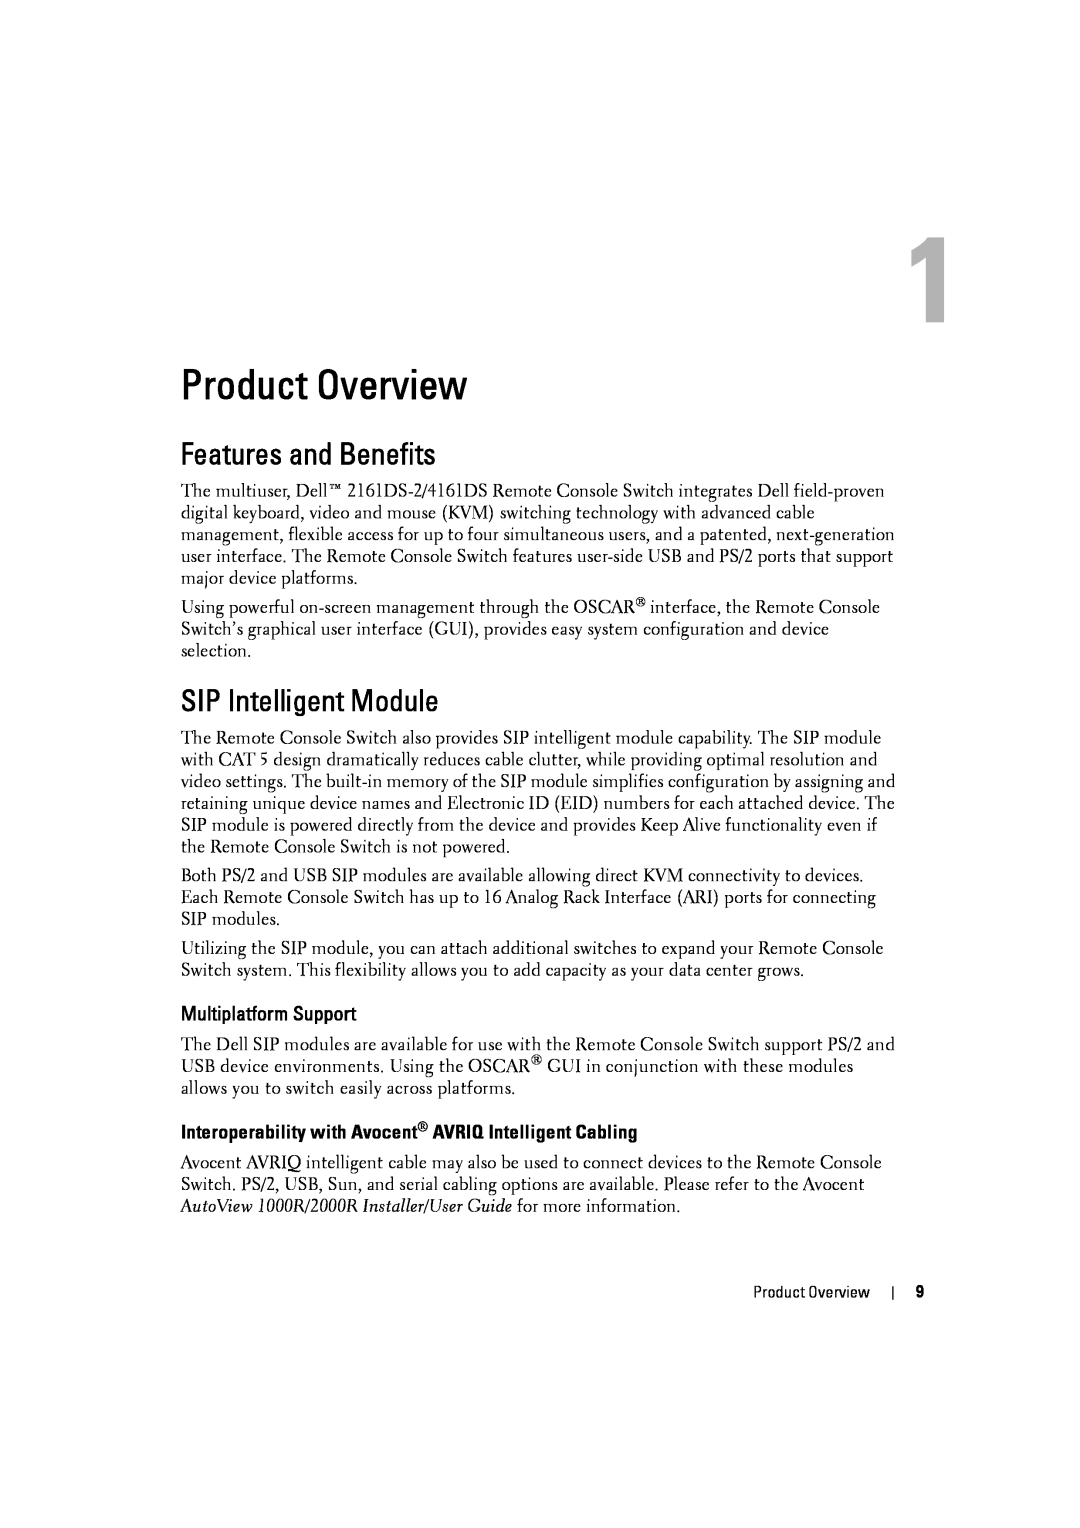 Dell 2161DS-2, 4161DS manual Product Overview, Features and Benefits, SIP Intelligent Module, Multiplatform Support 